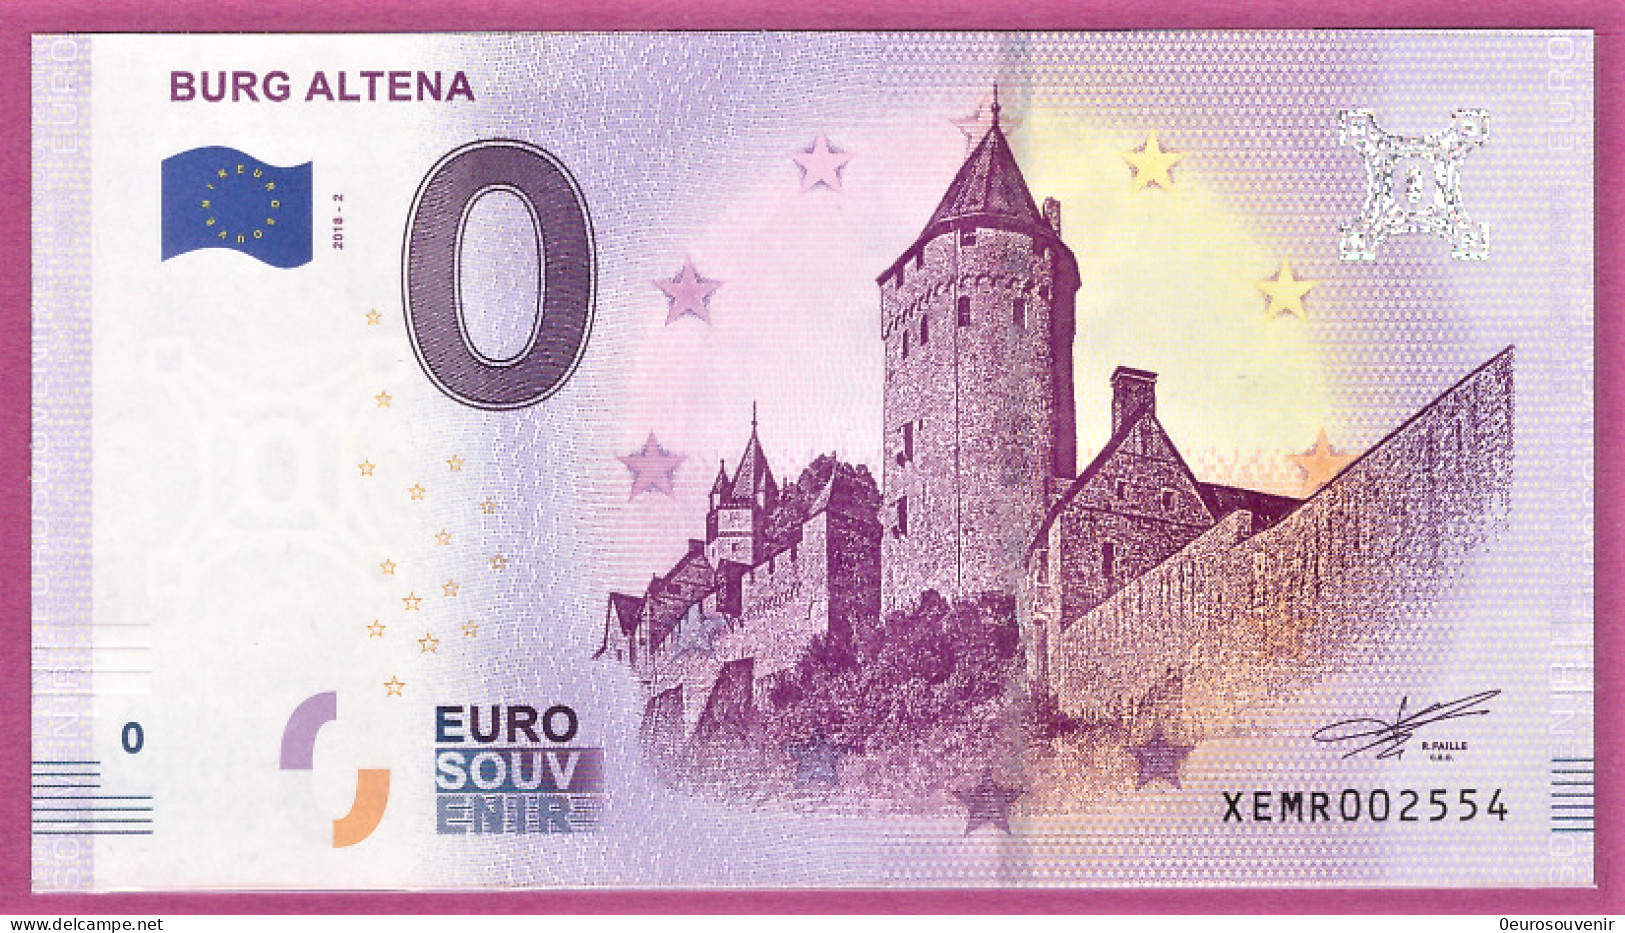 0-Euro XEMR 2 2018 BURG ALTENA - Private Proofs / Unofficial